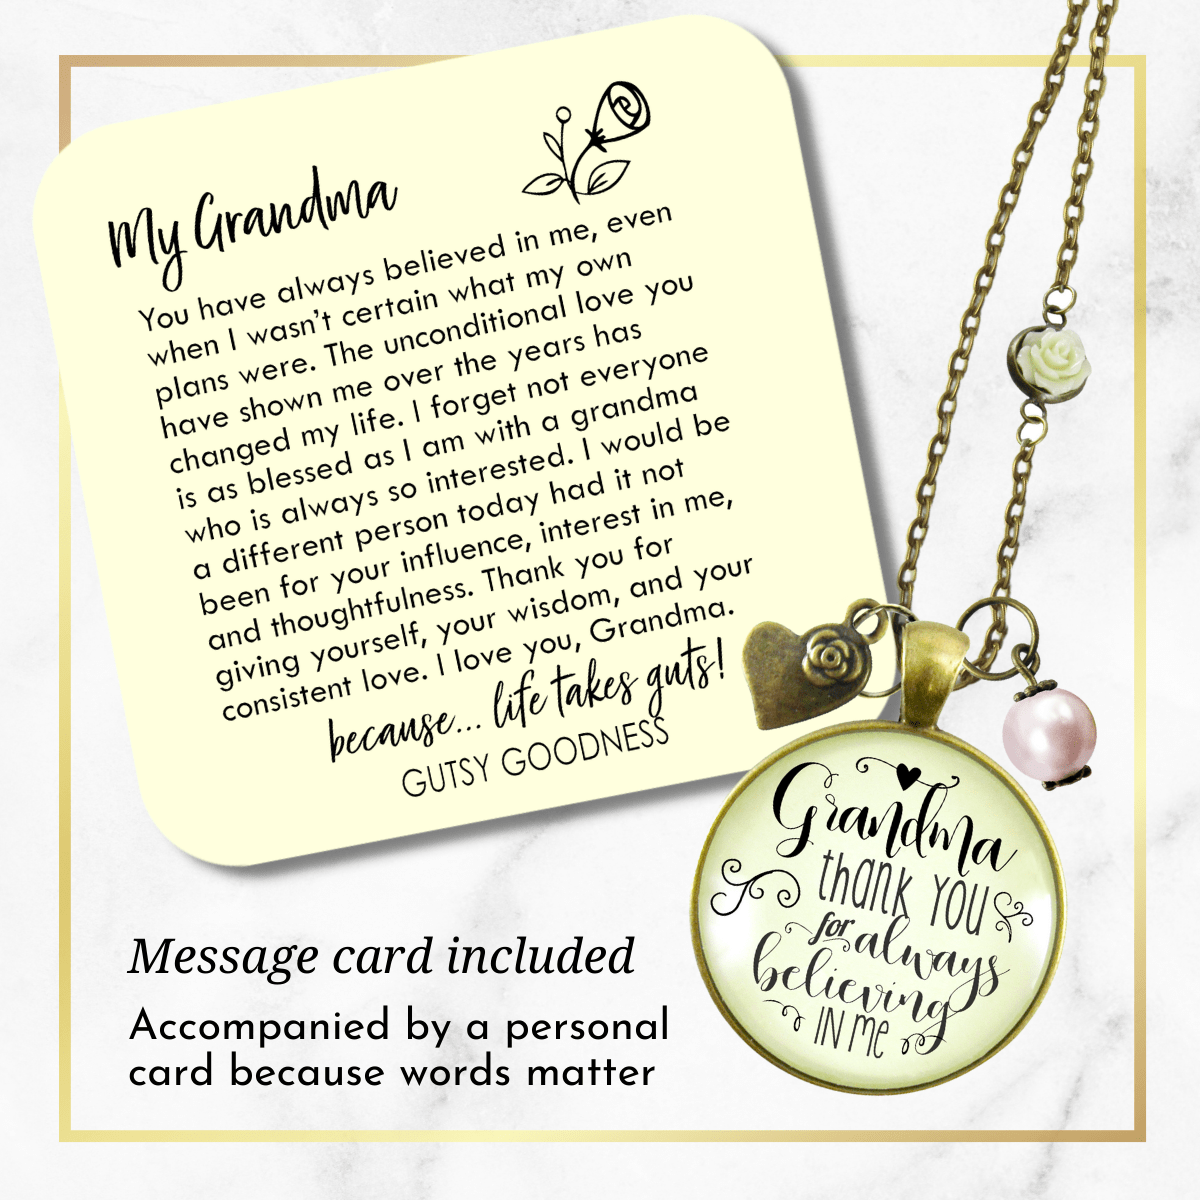 Gutsy Goodness Grandma Necklace Thank You for Believing from Grandchild Jewelry - Gutsy Goodness Handmade Jewelry;Grandma Necklace Thank You For Believing From Grandchild Jewelry - Gutsy Goodness Handmade Jewelry Gifts